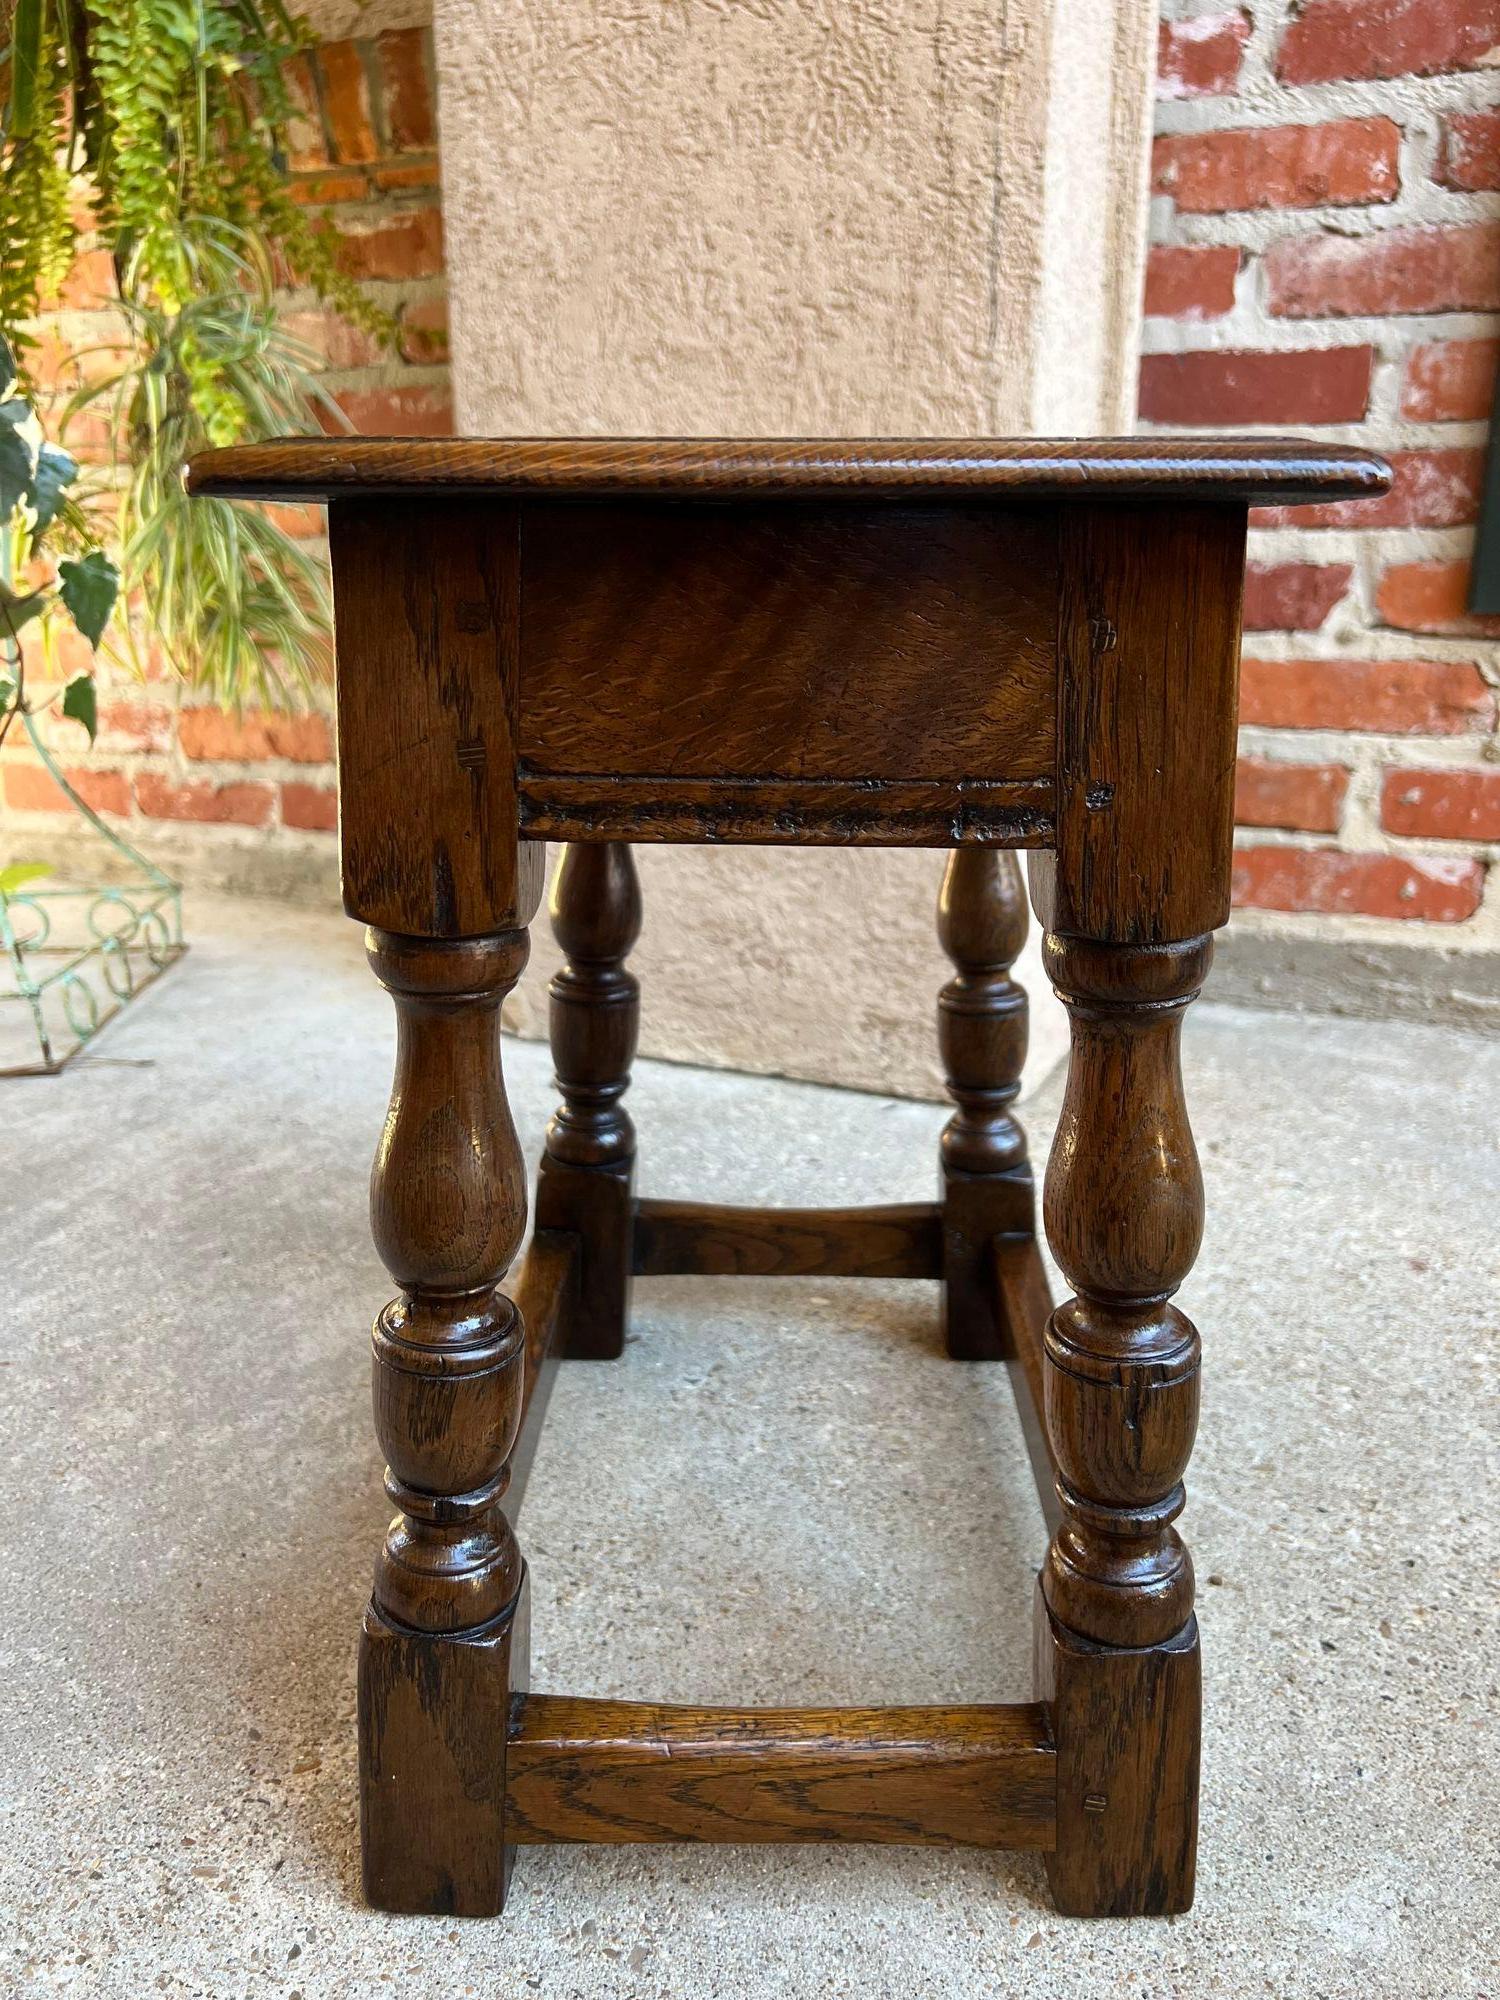 19th century English Oak Joint Stool Pegged Bench Display Stand In Good Condition For Sale In Shreveport, LA